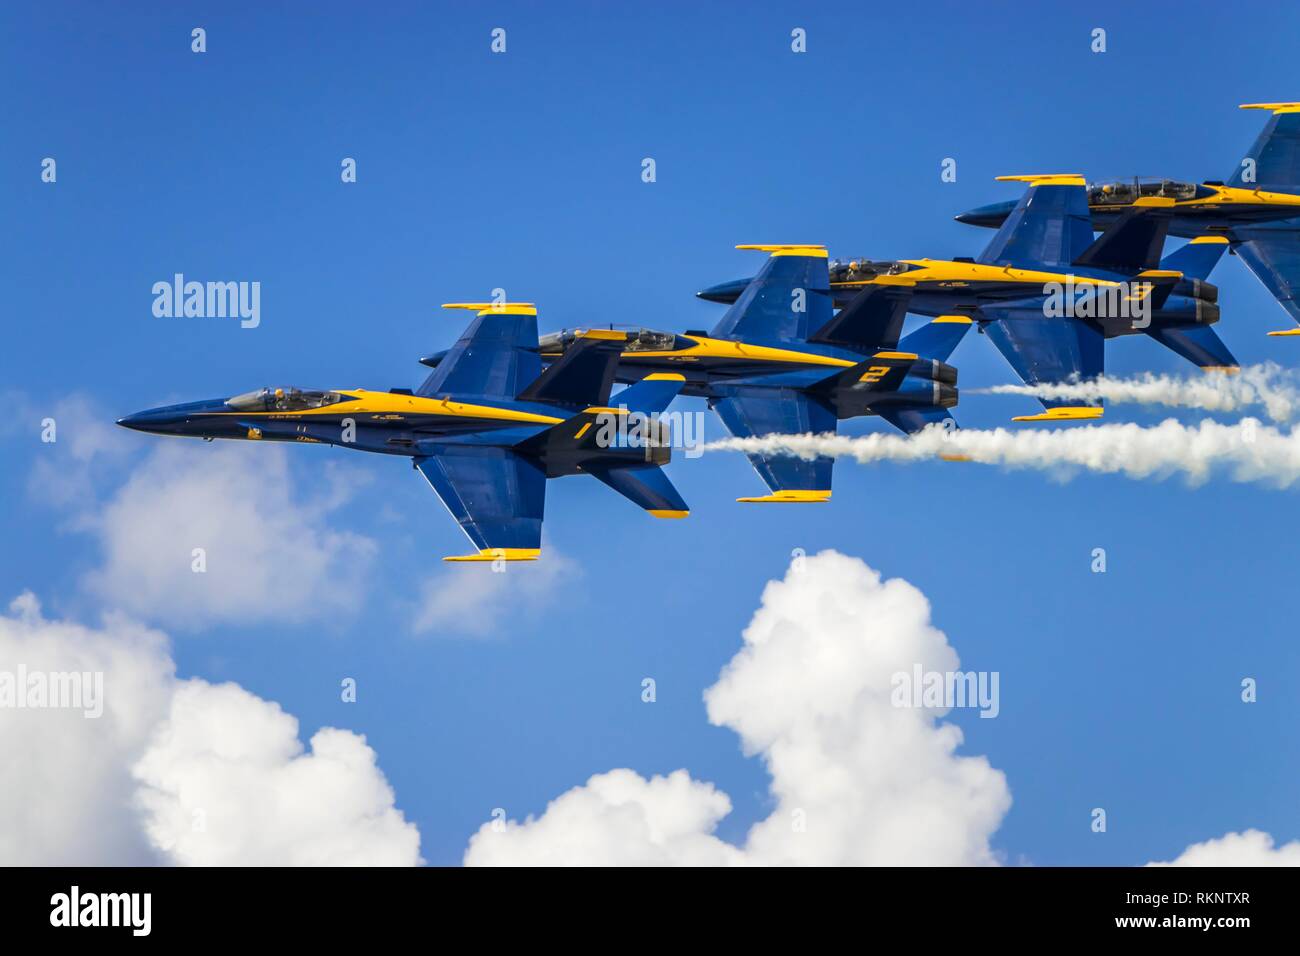 The Blue Angels air acrobatic team at the 2017 Airshow in Duluth, Minnesota, USA. Stock Photo